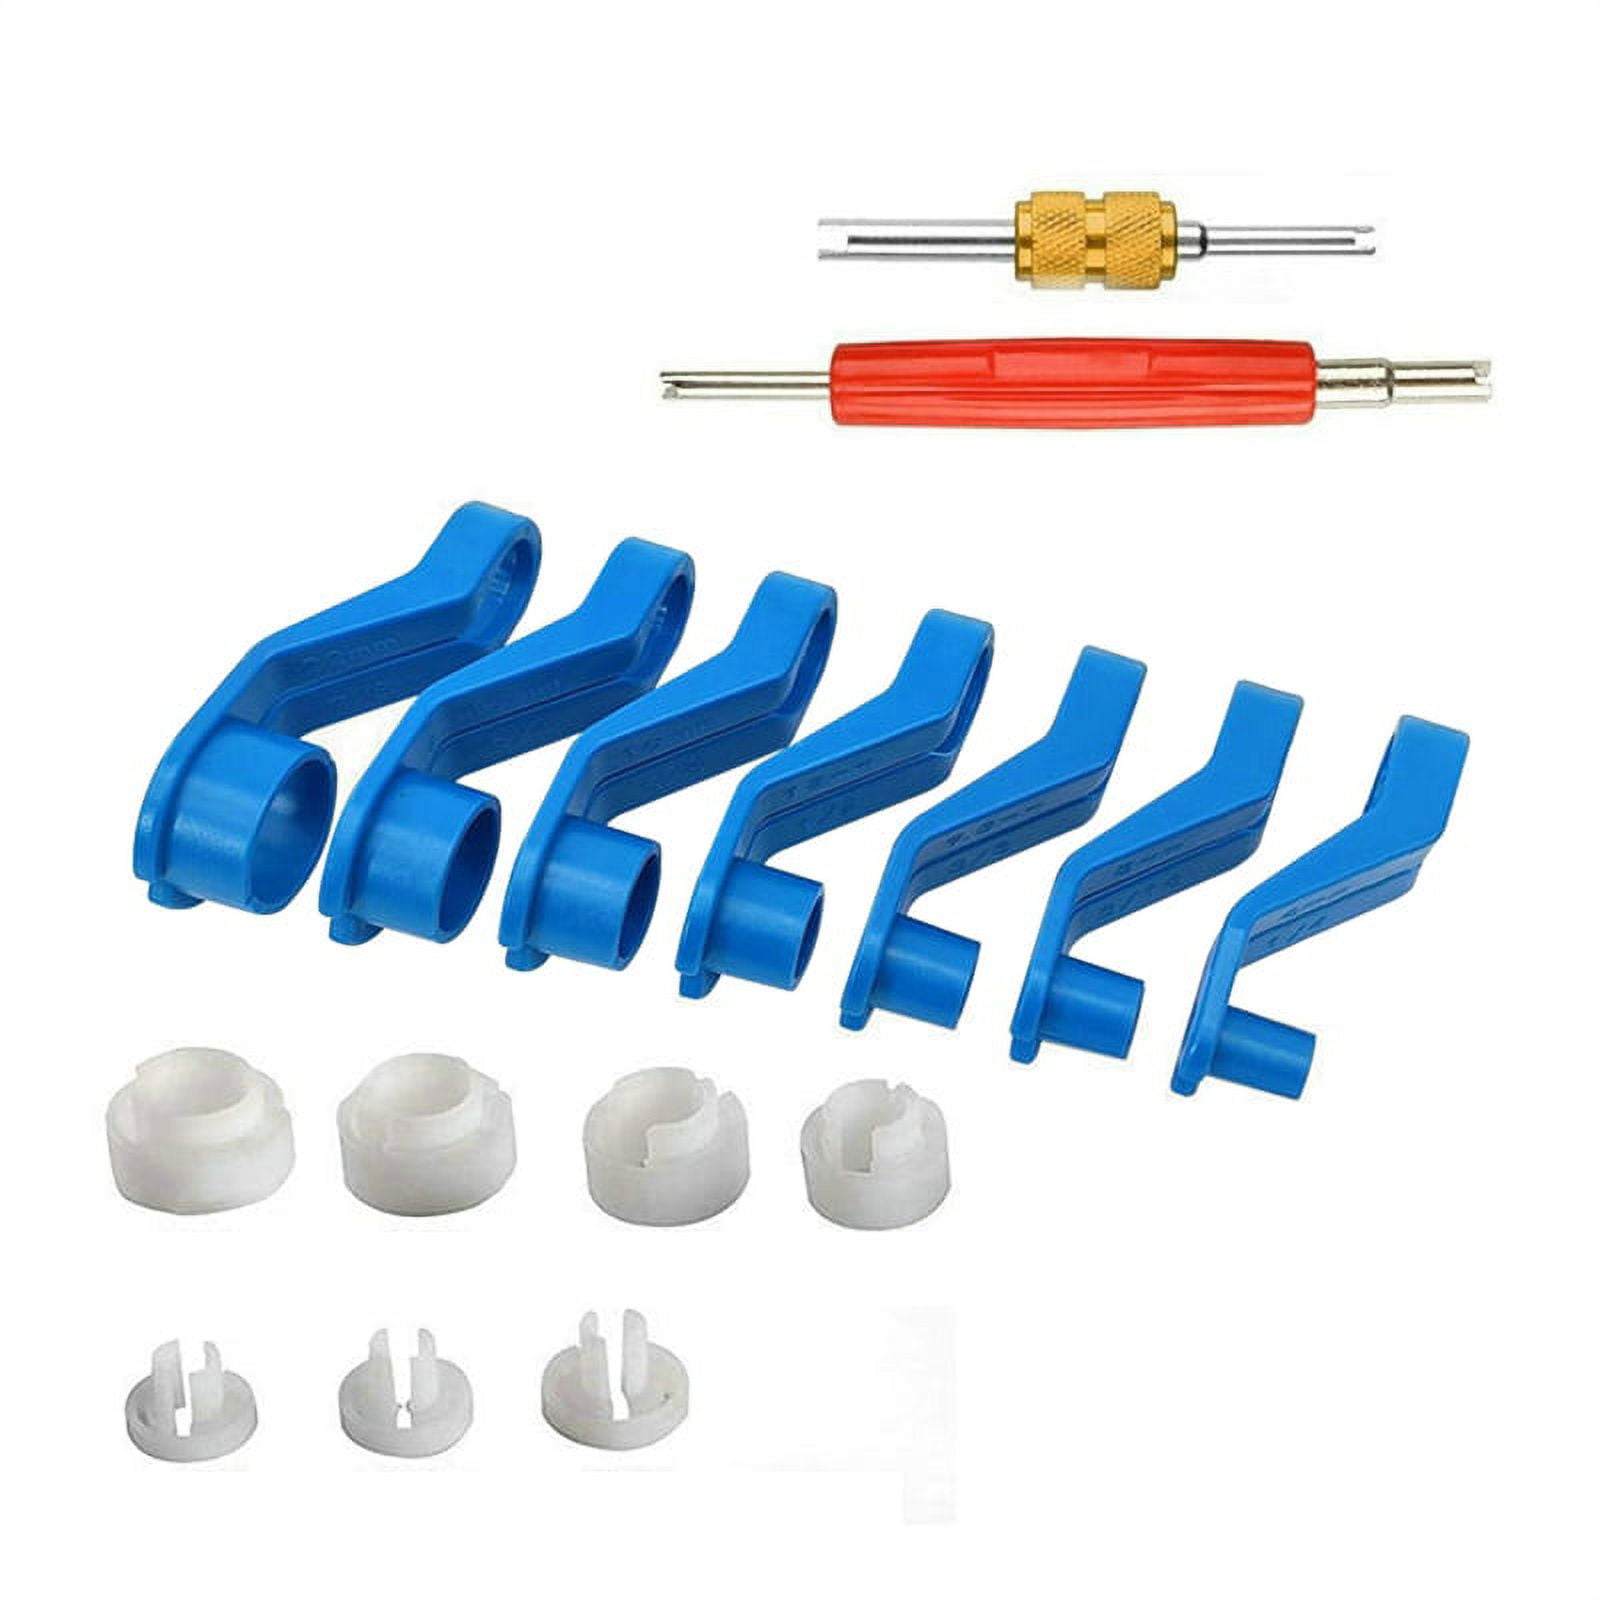 16PCS AC Disconnect Fuel Line Disconnect Tool Set Car Removal Tool K.